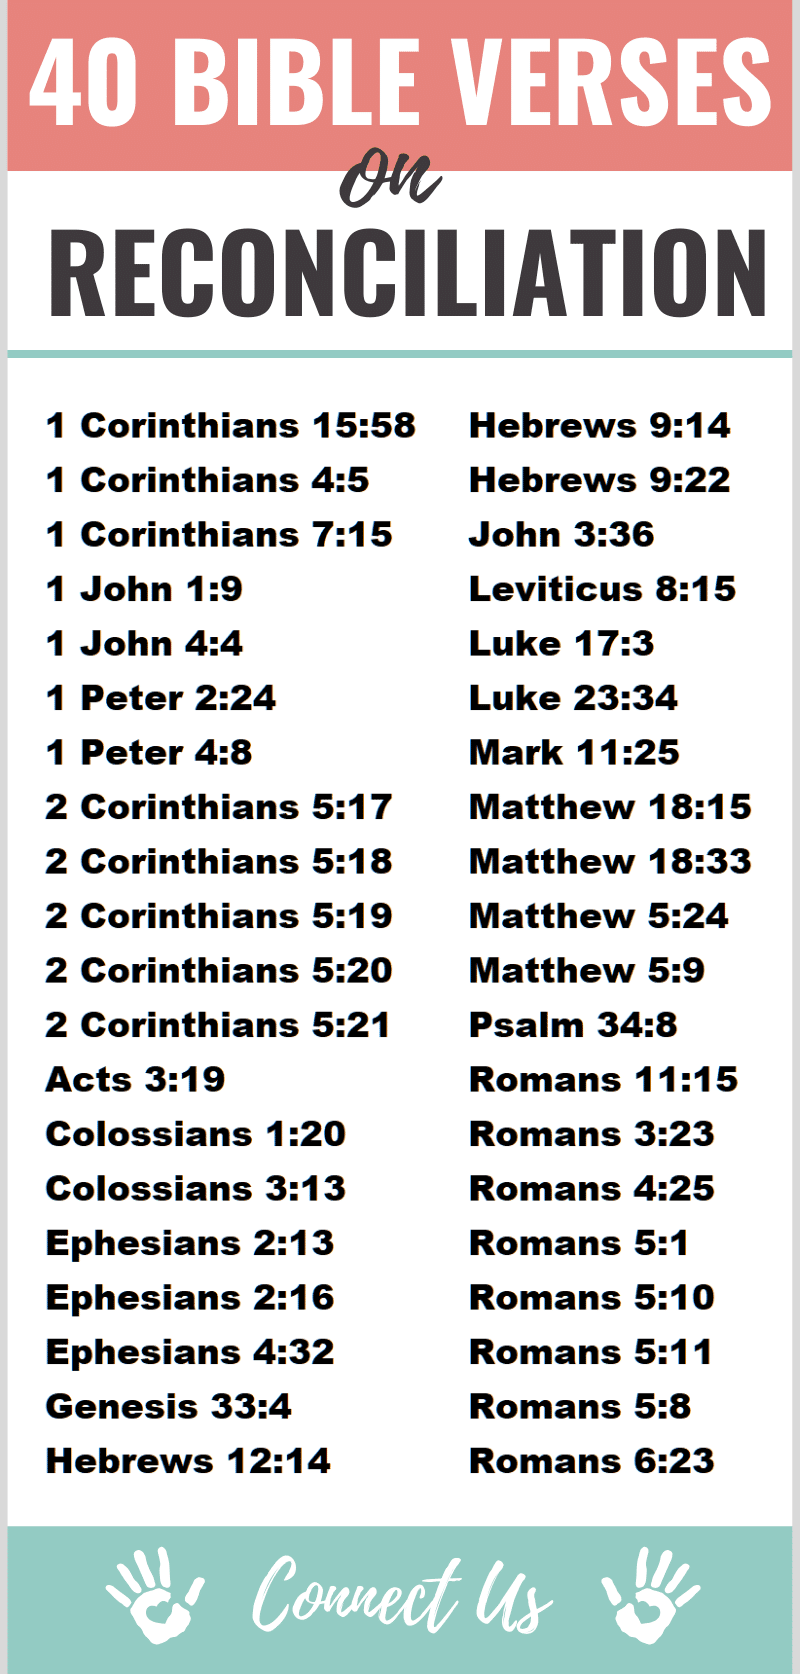 Bible Verses on Reconciliation